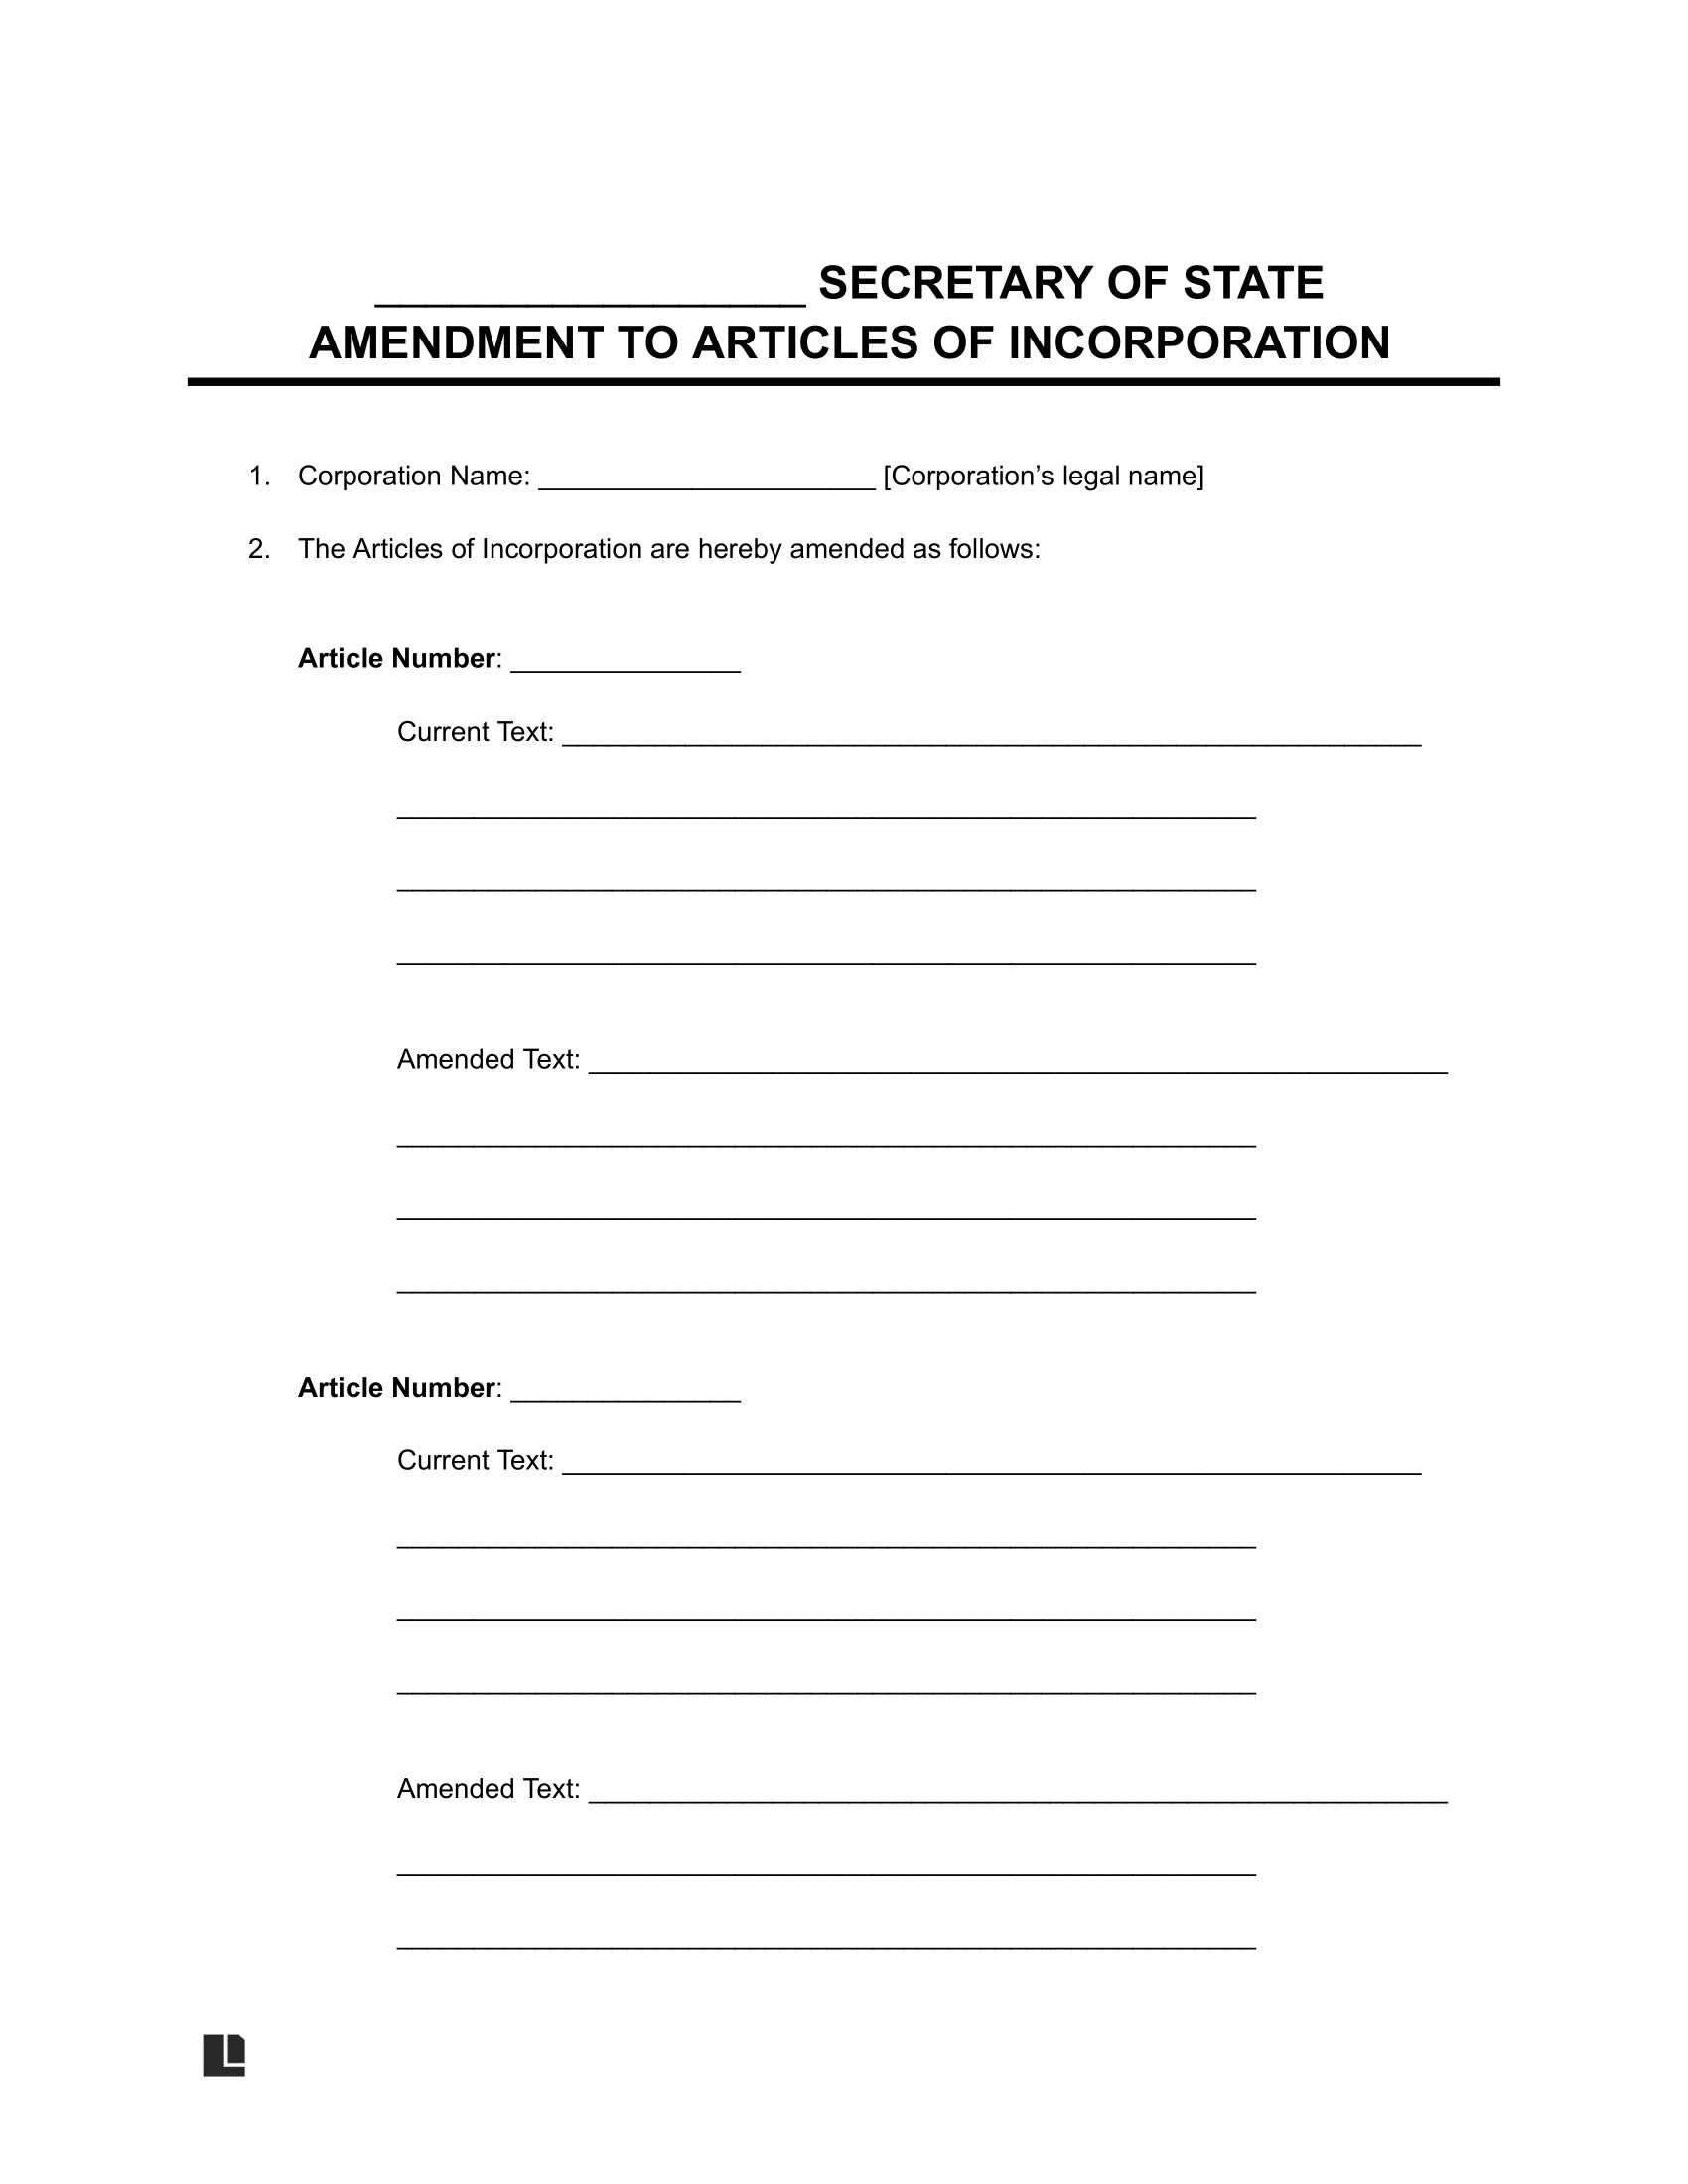 amendment to articles of incorporation form